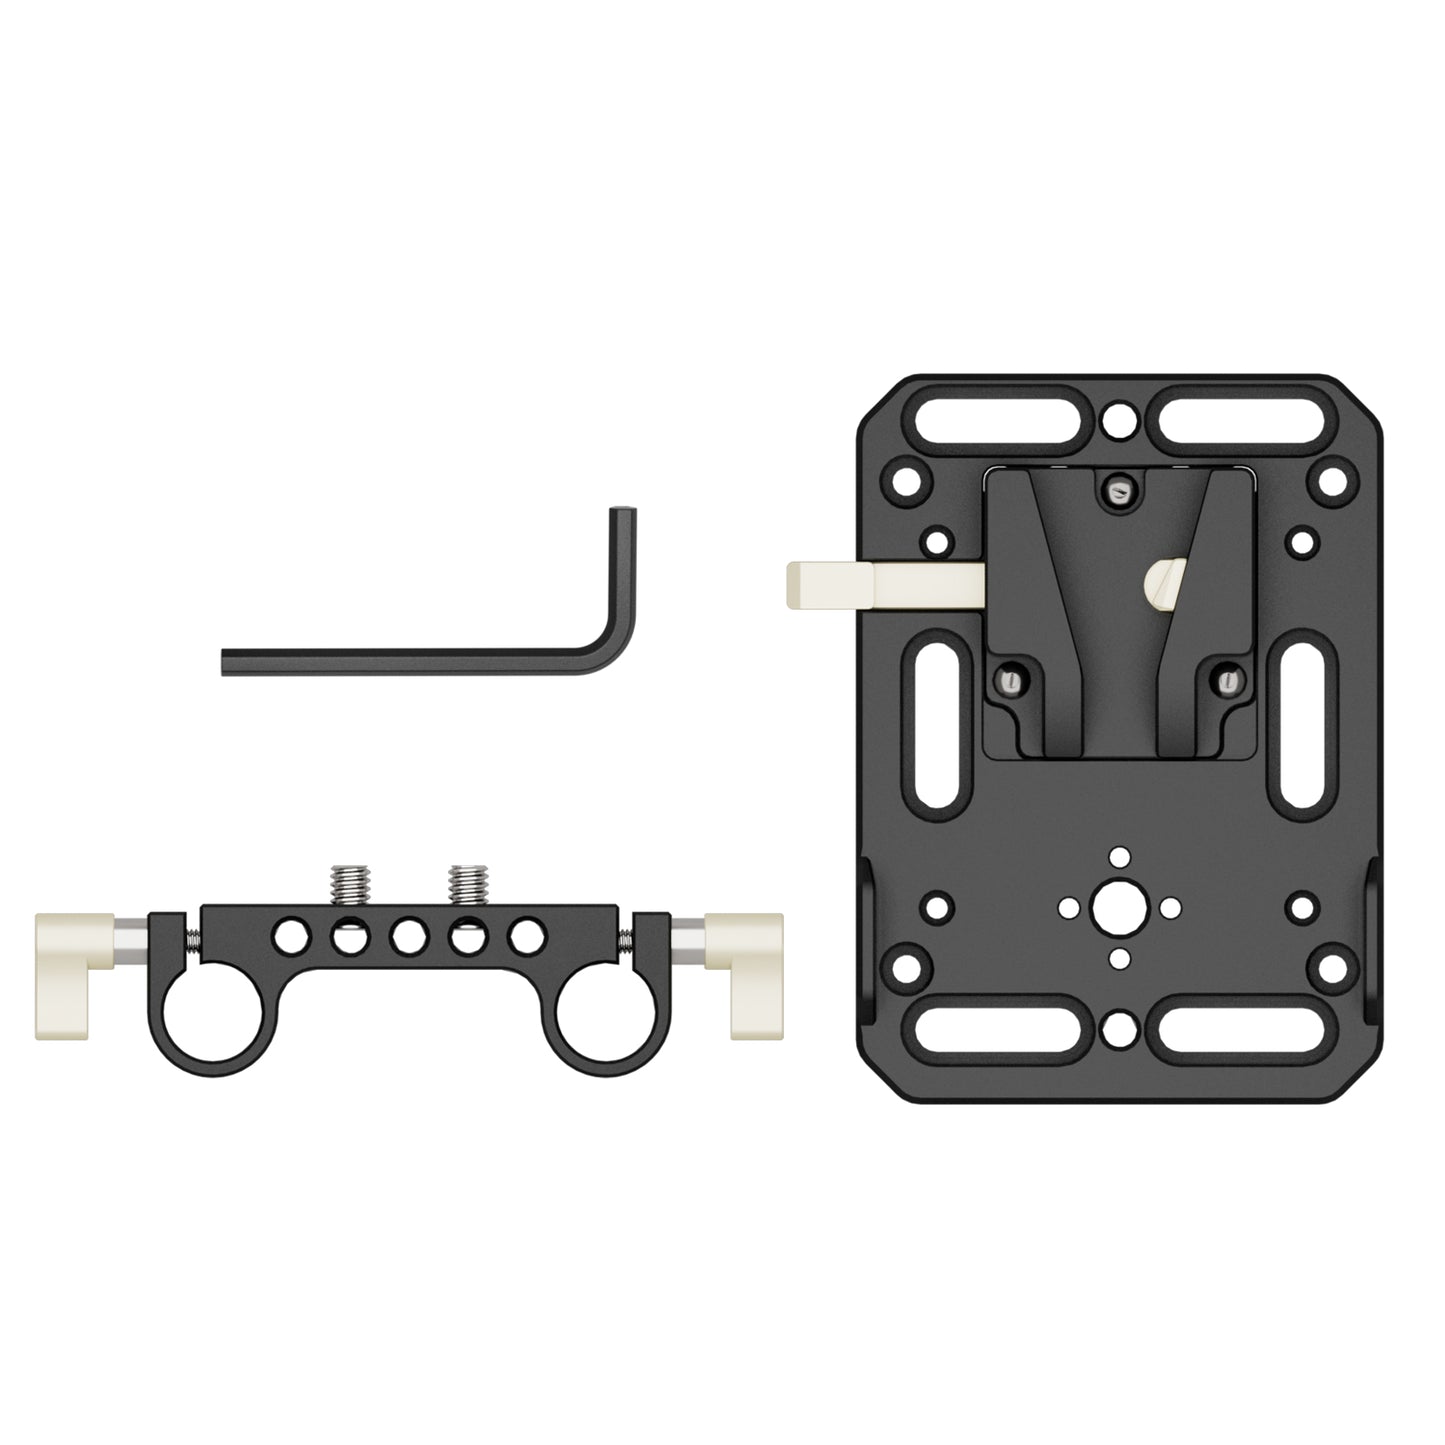 ZGCINE VR-Kit 1 V-Lock Mount Battery Plate with Dual 15mm Rod Clamp